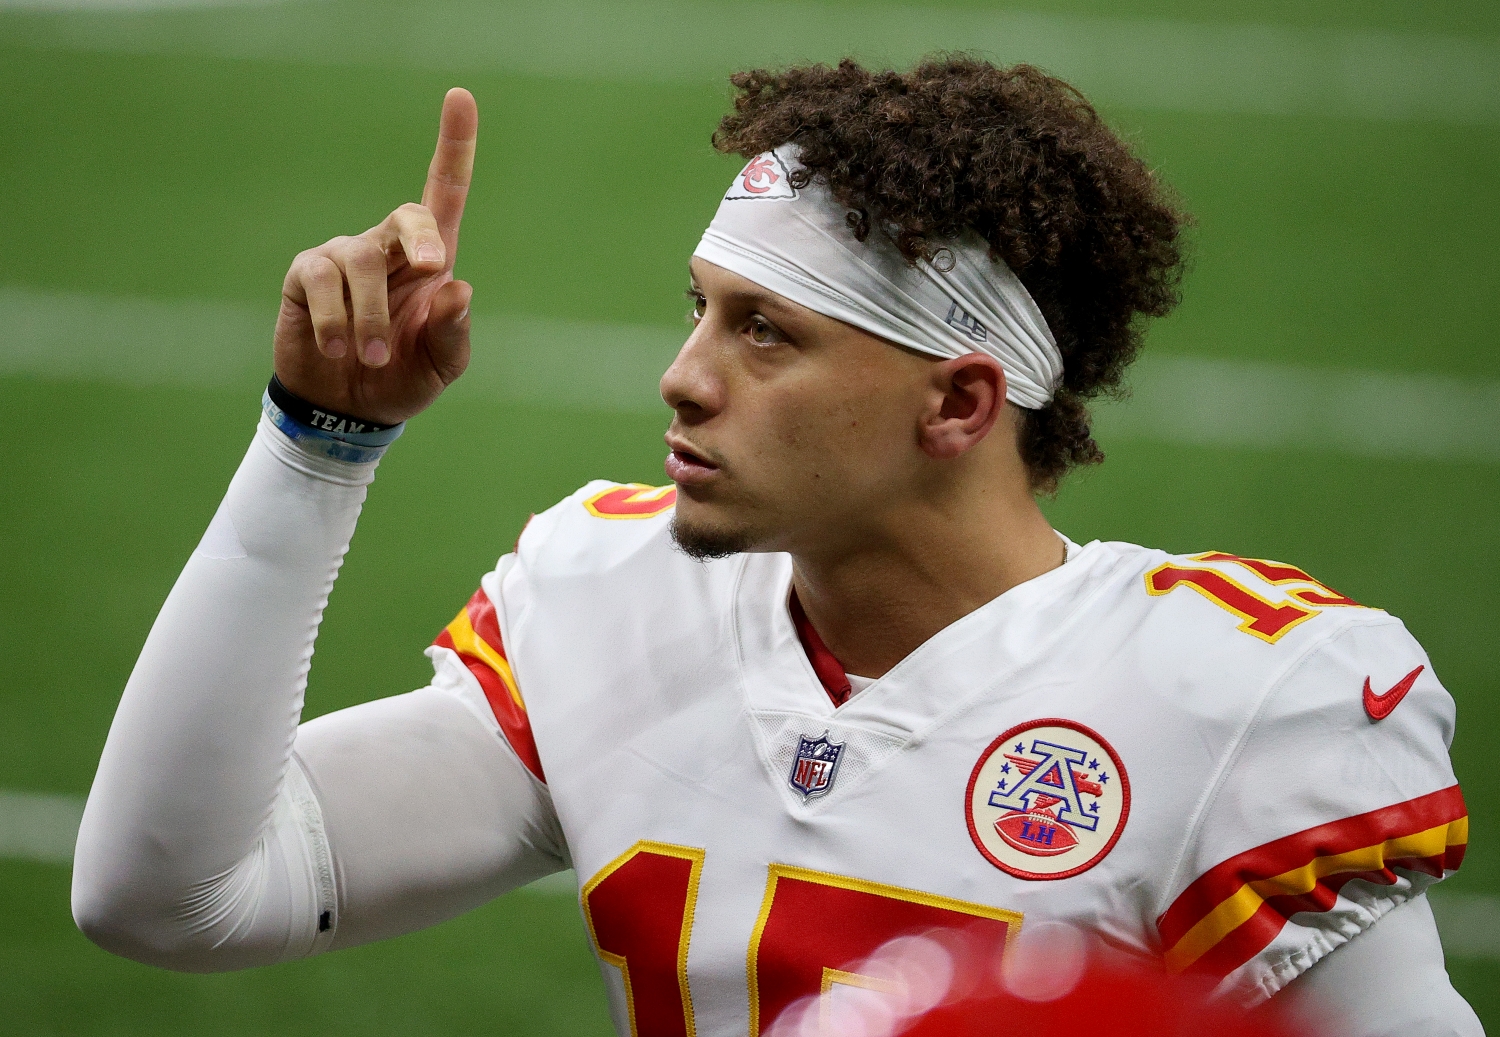 Kansas City Chiefs QB Patrick Mahomes, who has one of the highest NFL salaries, points to the sky before a game.